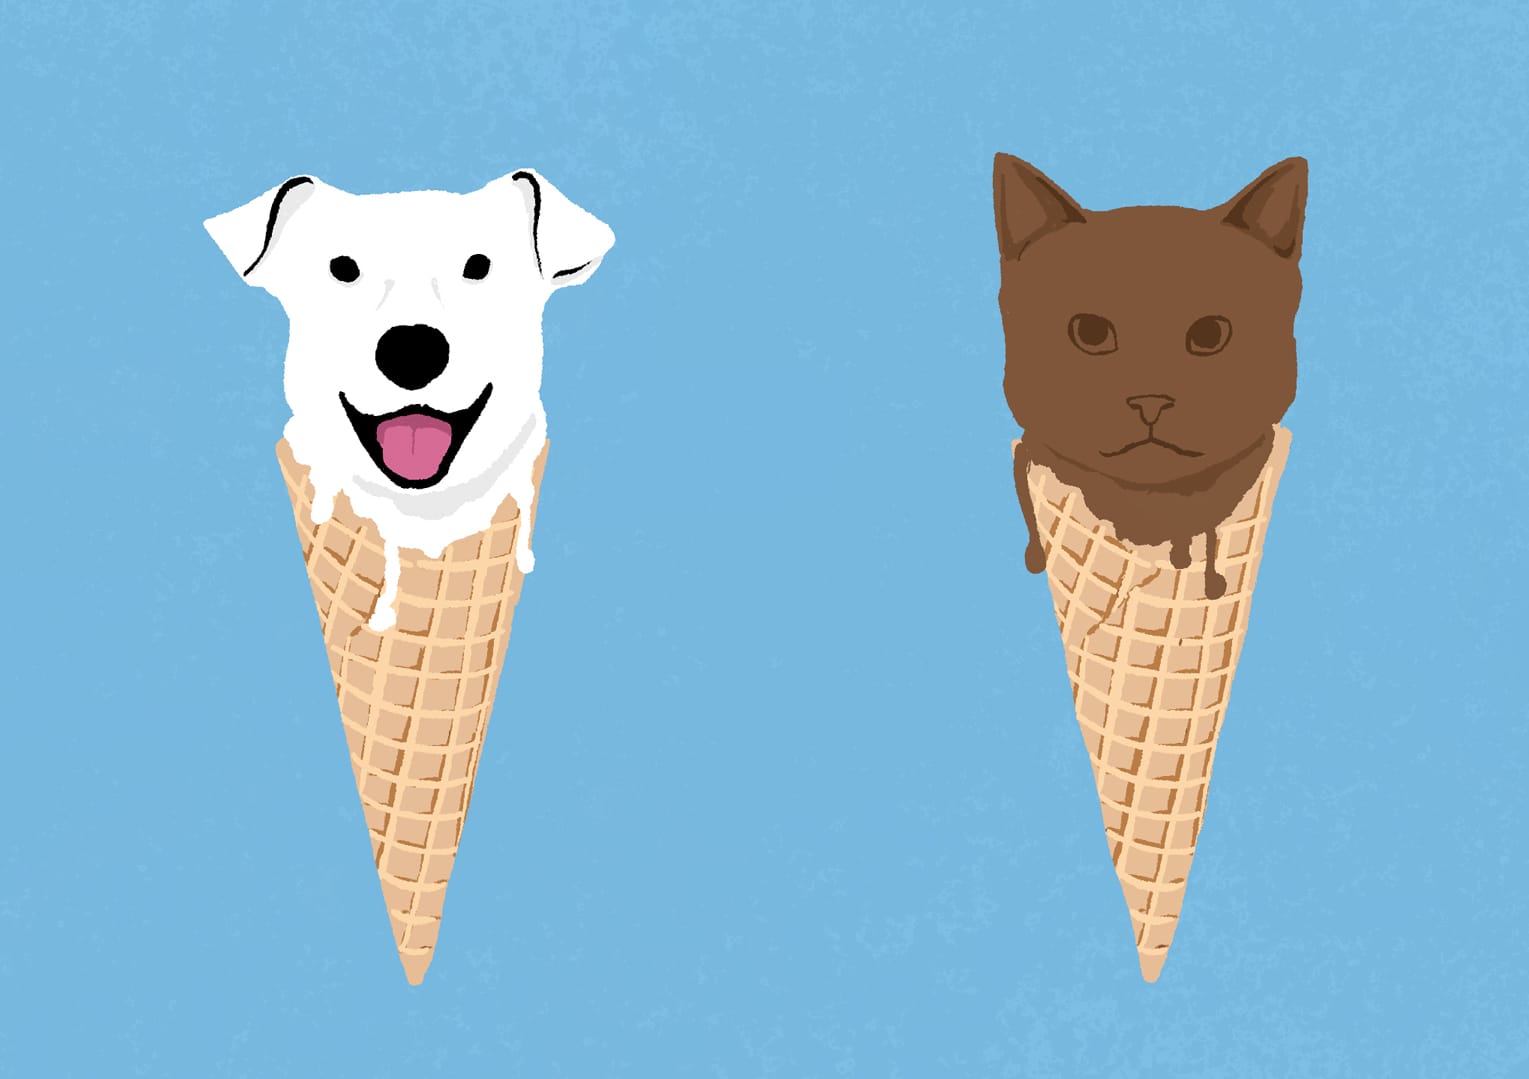 Conceptual image of ice cream cones with cat and dog heads instead of the ice cream on top.